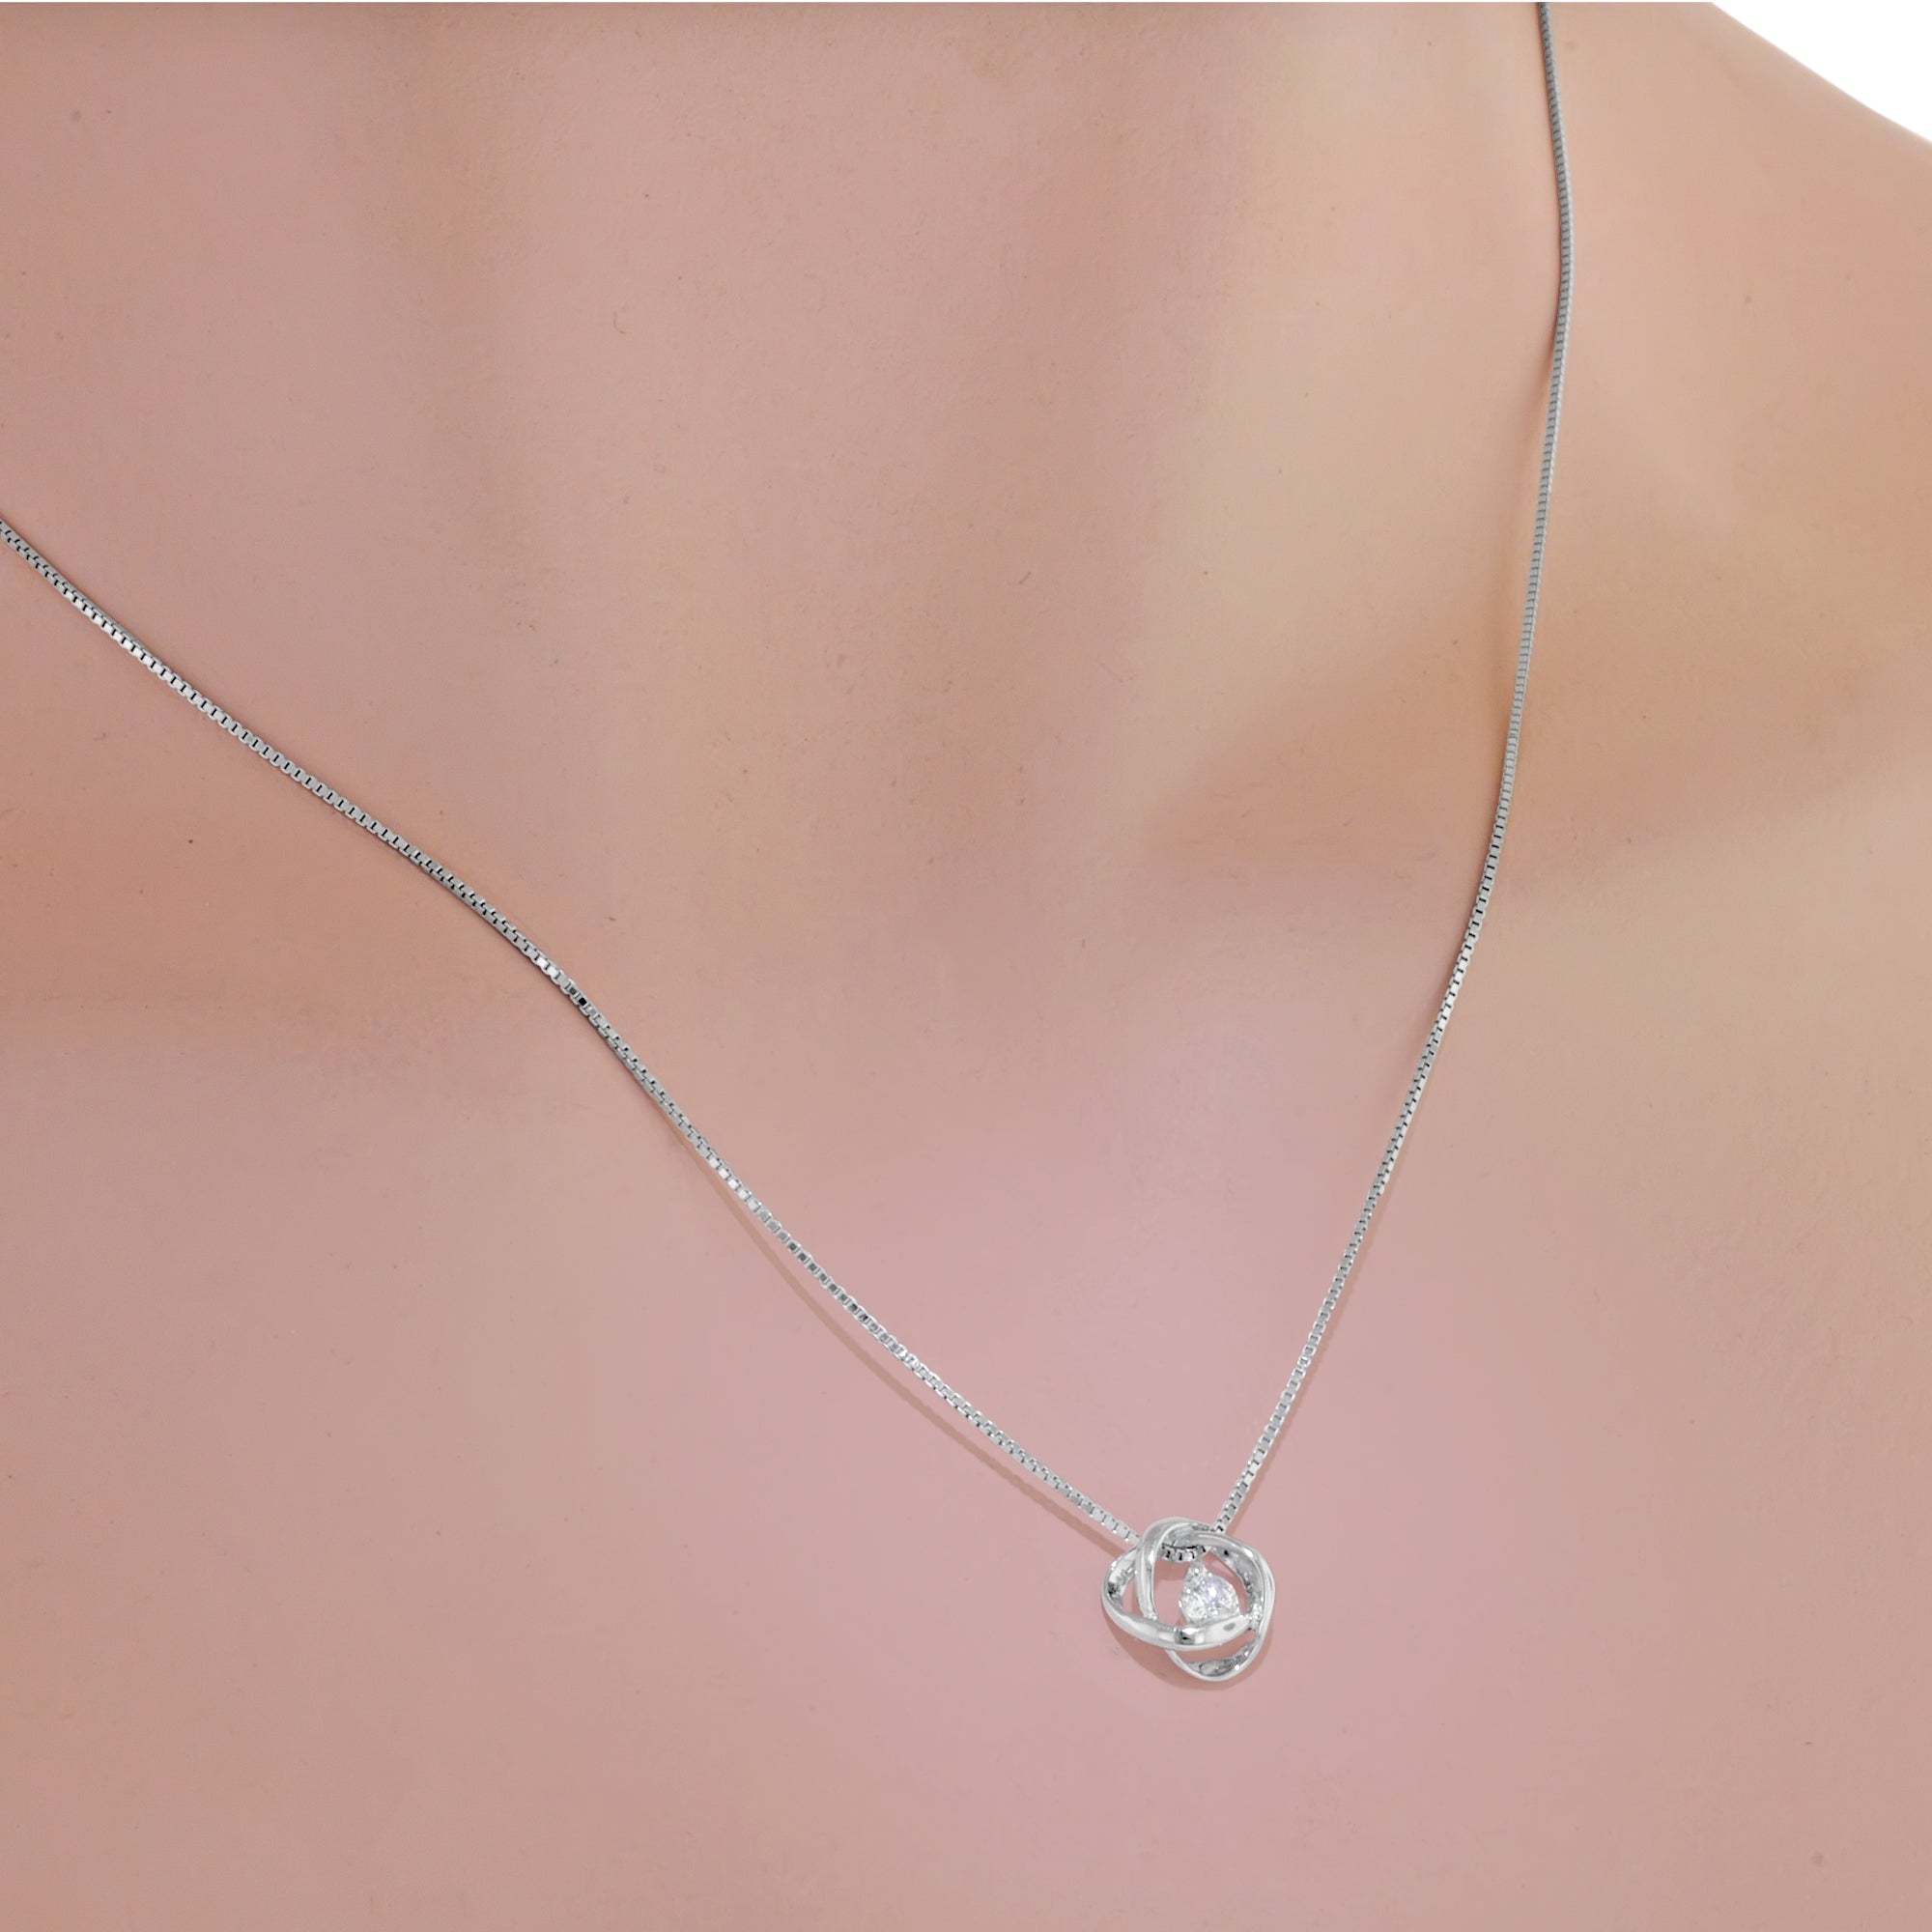 Northern Star Diamond Love Knot Collection Necklace in Sterling Silver (1/10ct tw)